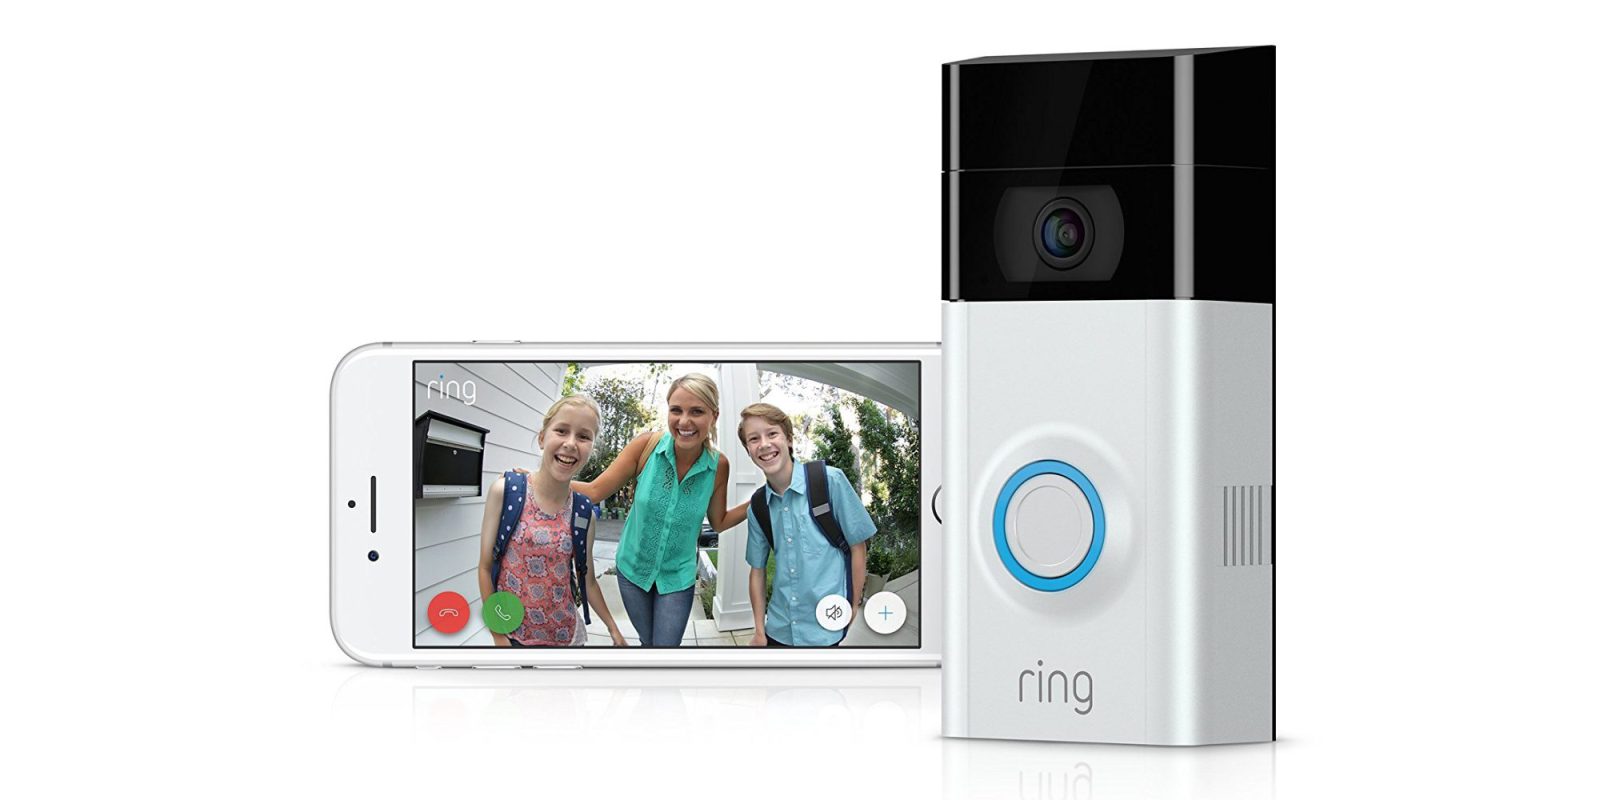 Het apparaat stuk organiseren Amazon acquiring smart home security firm Ring, HomeKit support still  promised for Ring Pro and Floodlight Cam - 9to5Mac